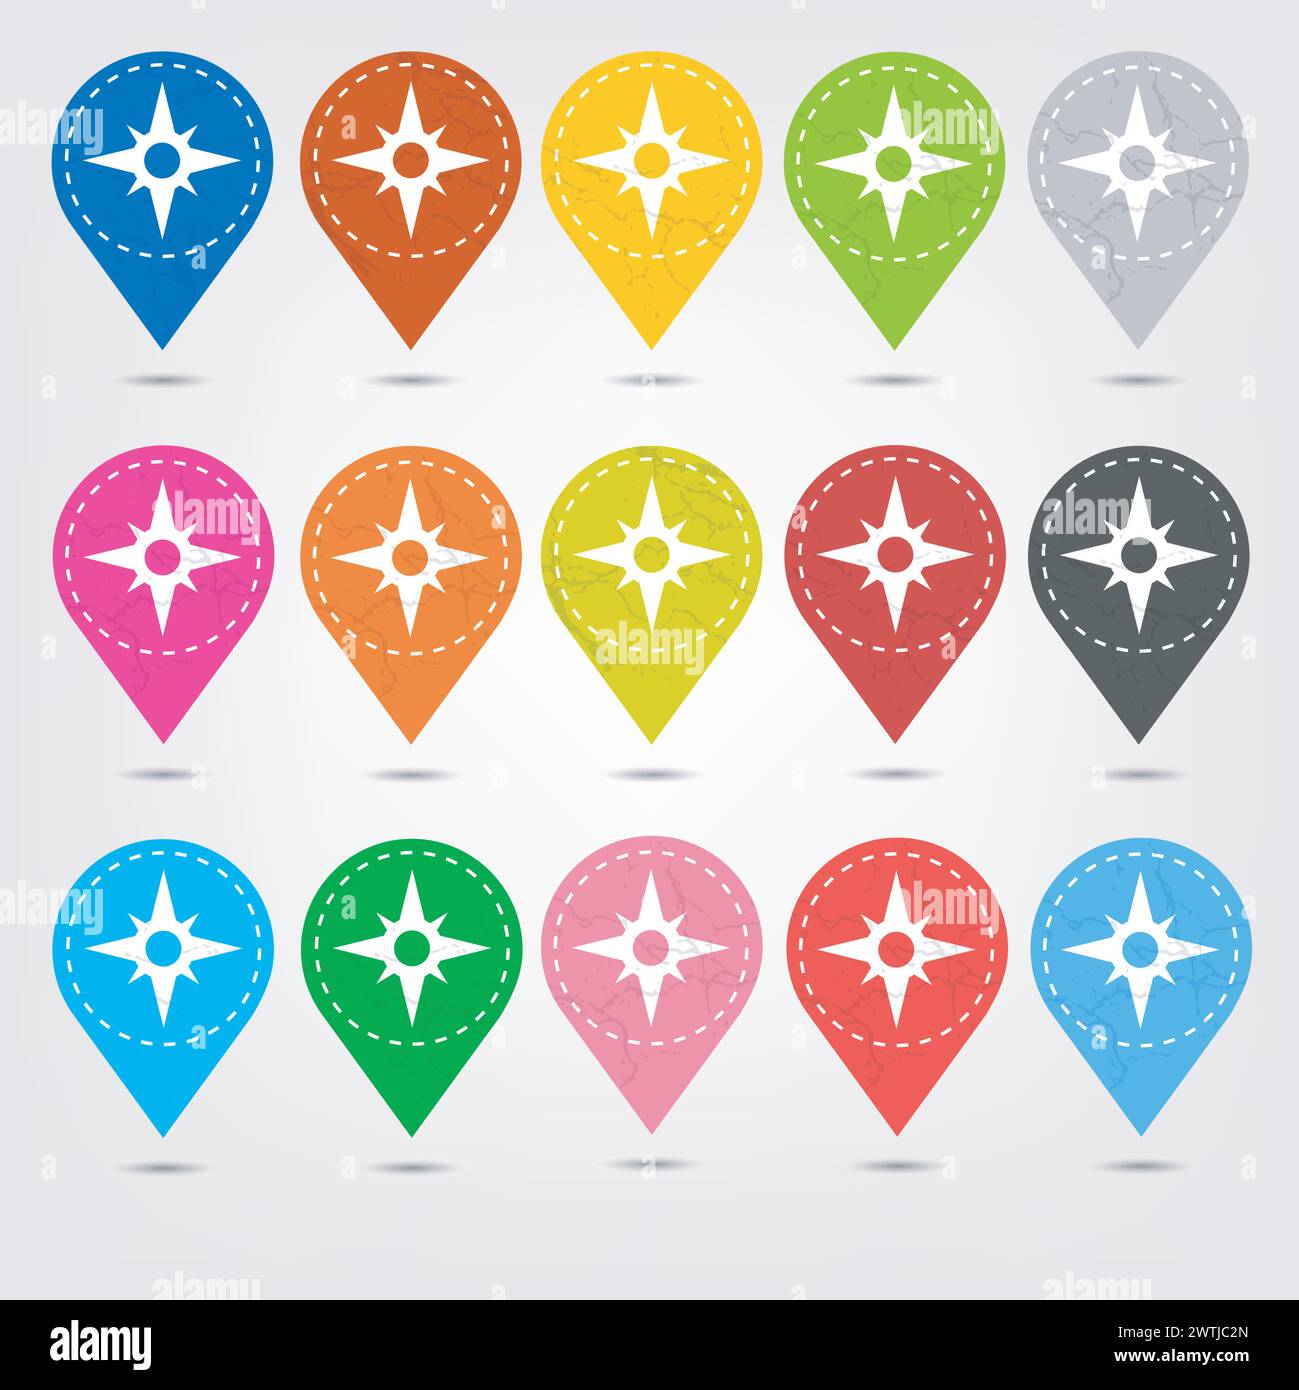 Colorful Stitched Location Mapping Pins Icon Sets, Vector Illustration Stock Vector